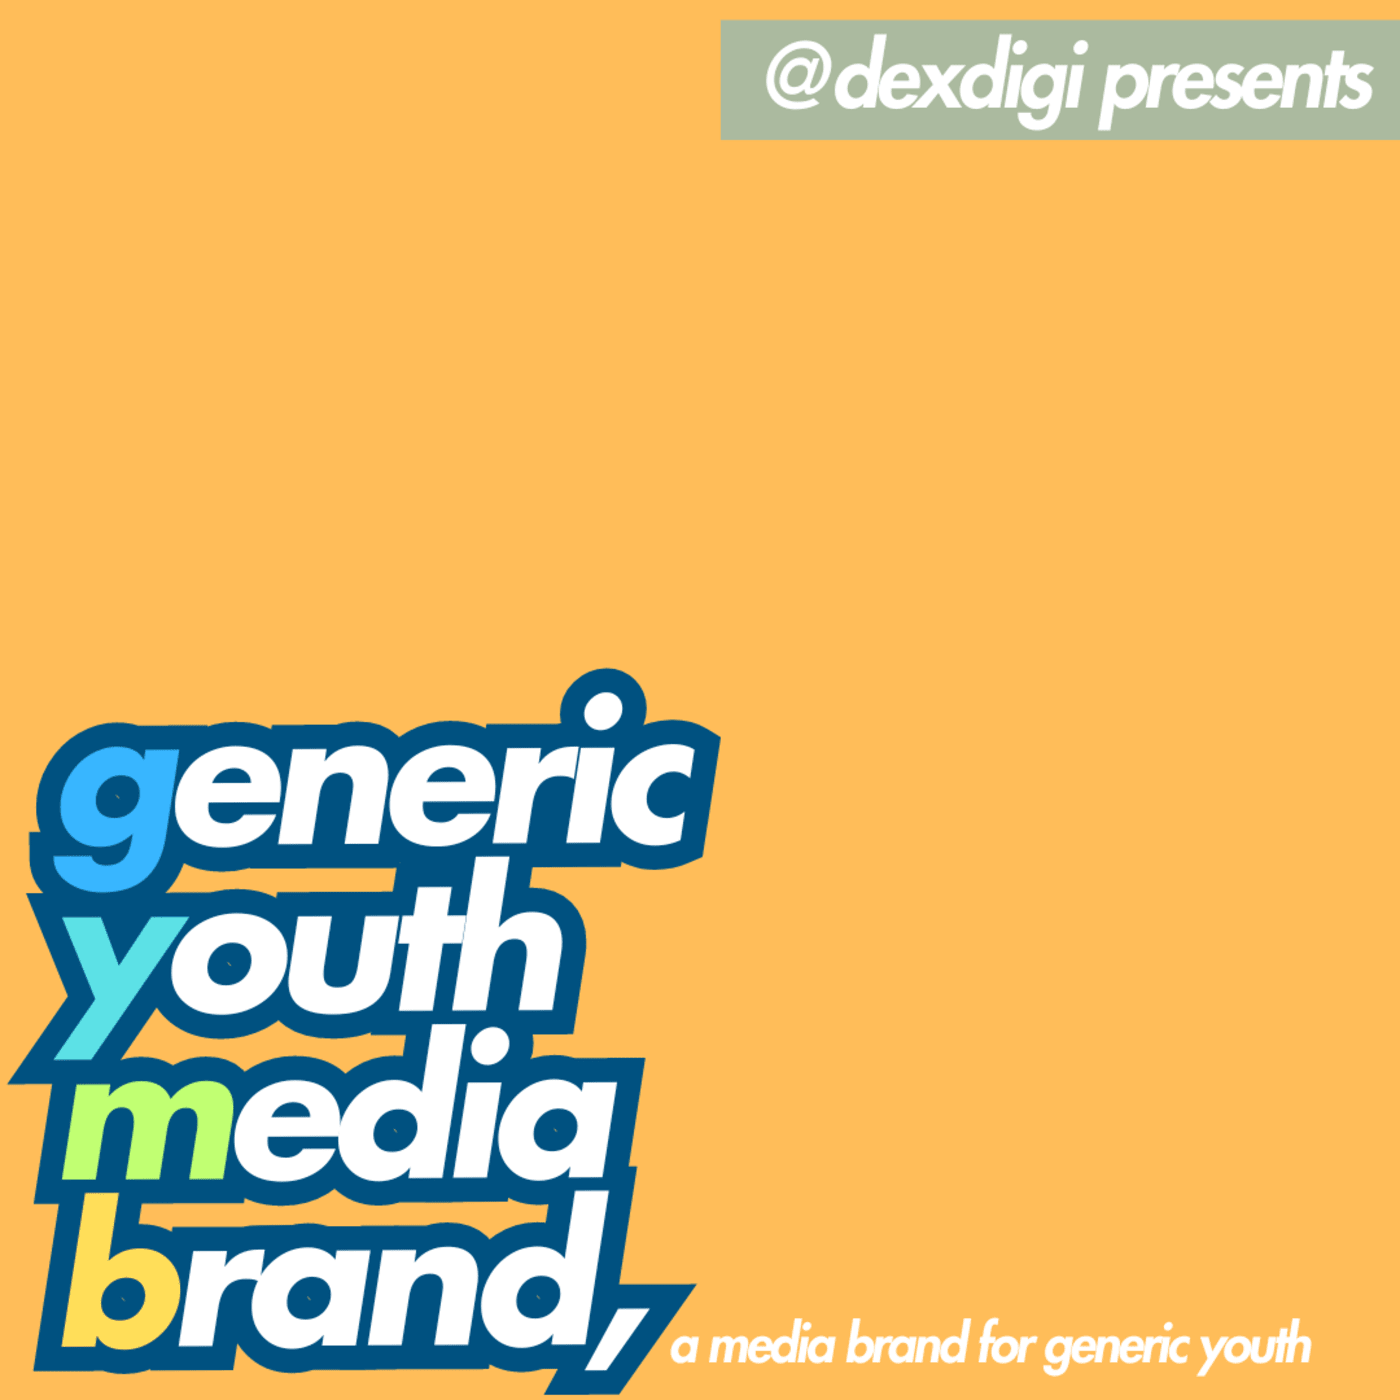 Show artwork for generic youth media brand